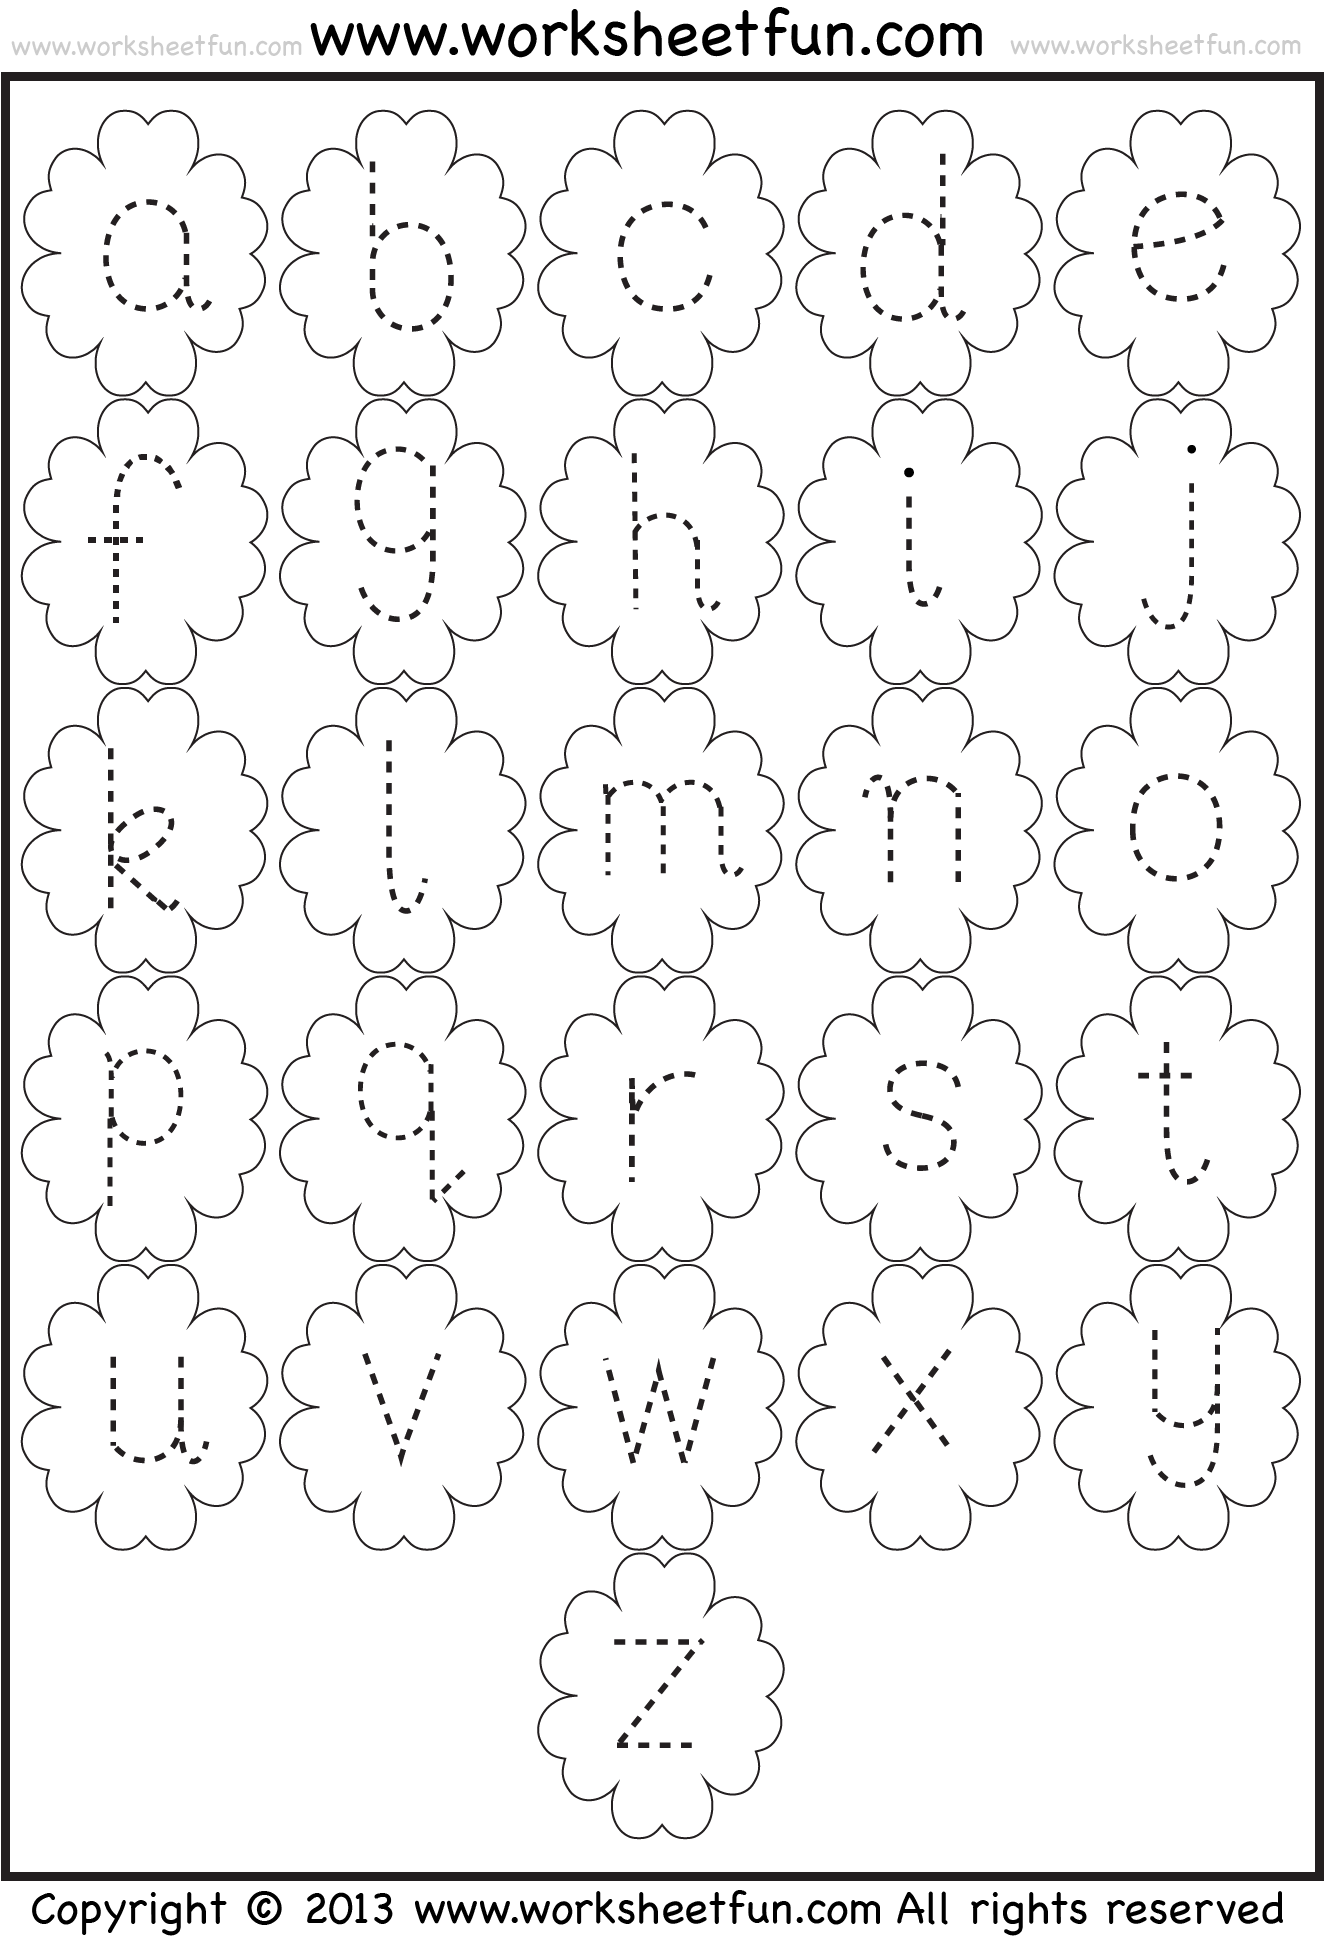 tracing-small-letters-worksheets-pdf-tracinglettersworksheets